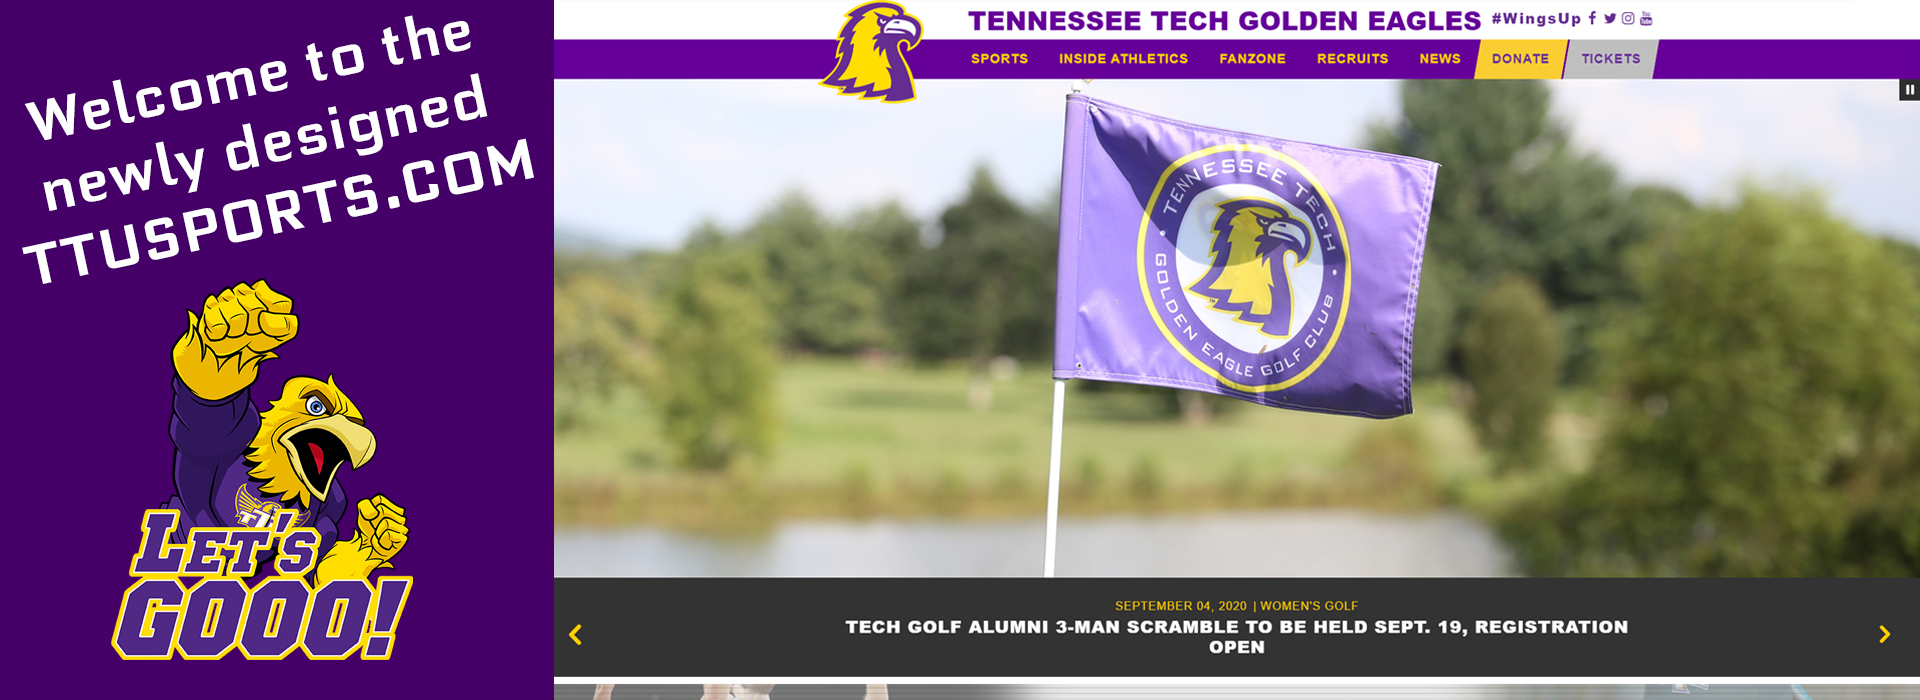 Tech Athletics launches newly redesigned TTUSports.com